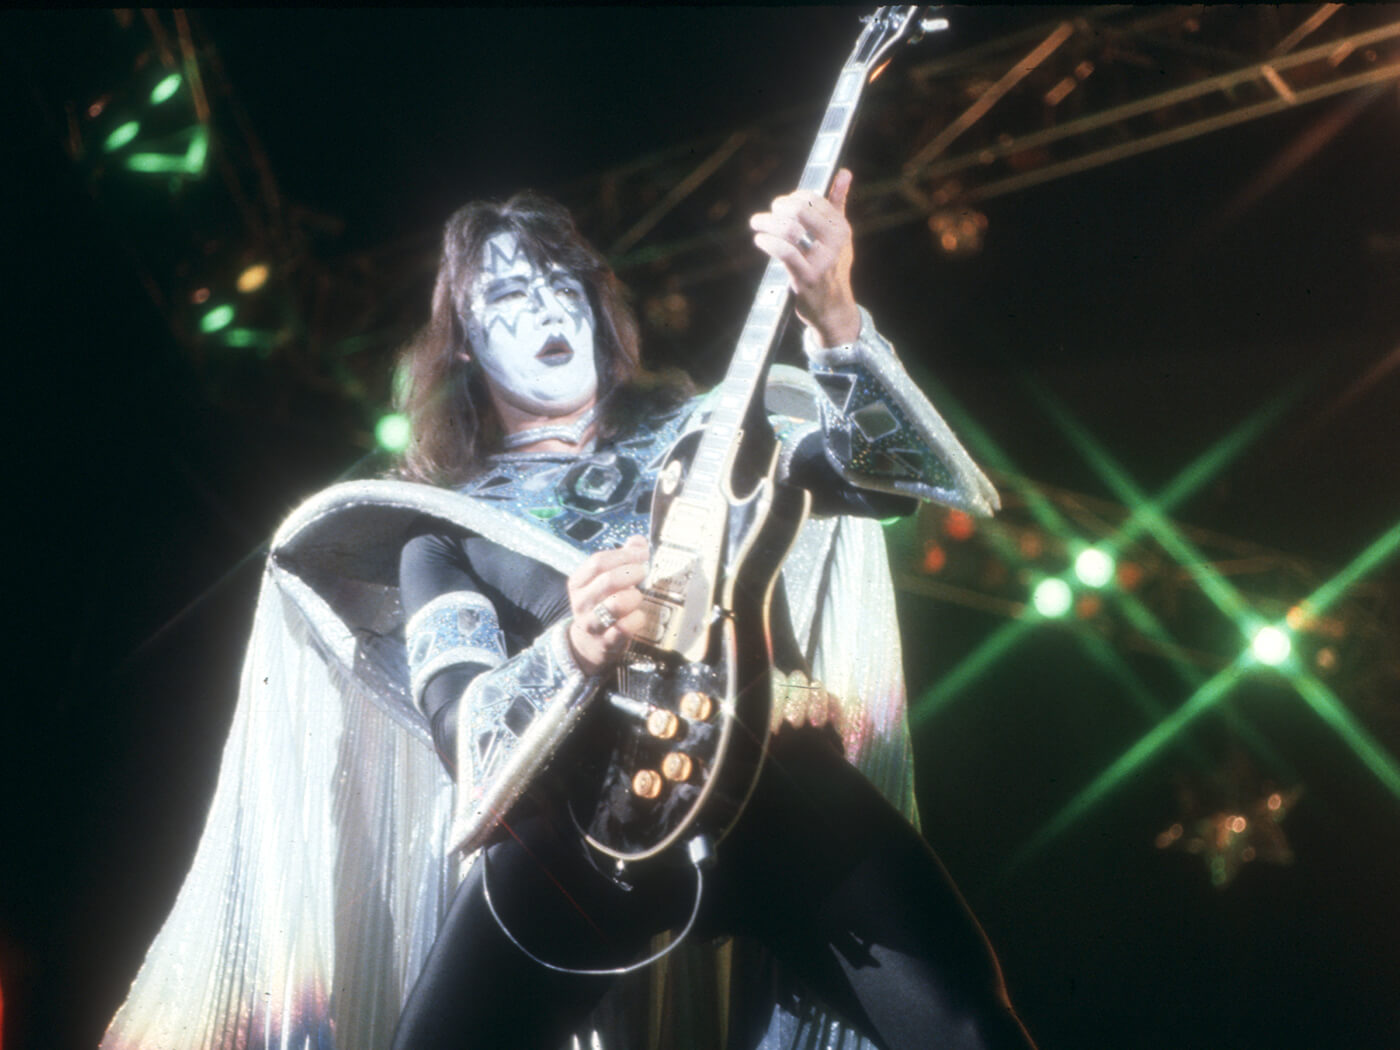 Ace Frehley performing with KISS in 1979, photo by Richard Creamer/Michael Ochs Archives via Getty Images